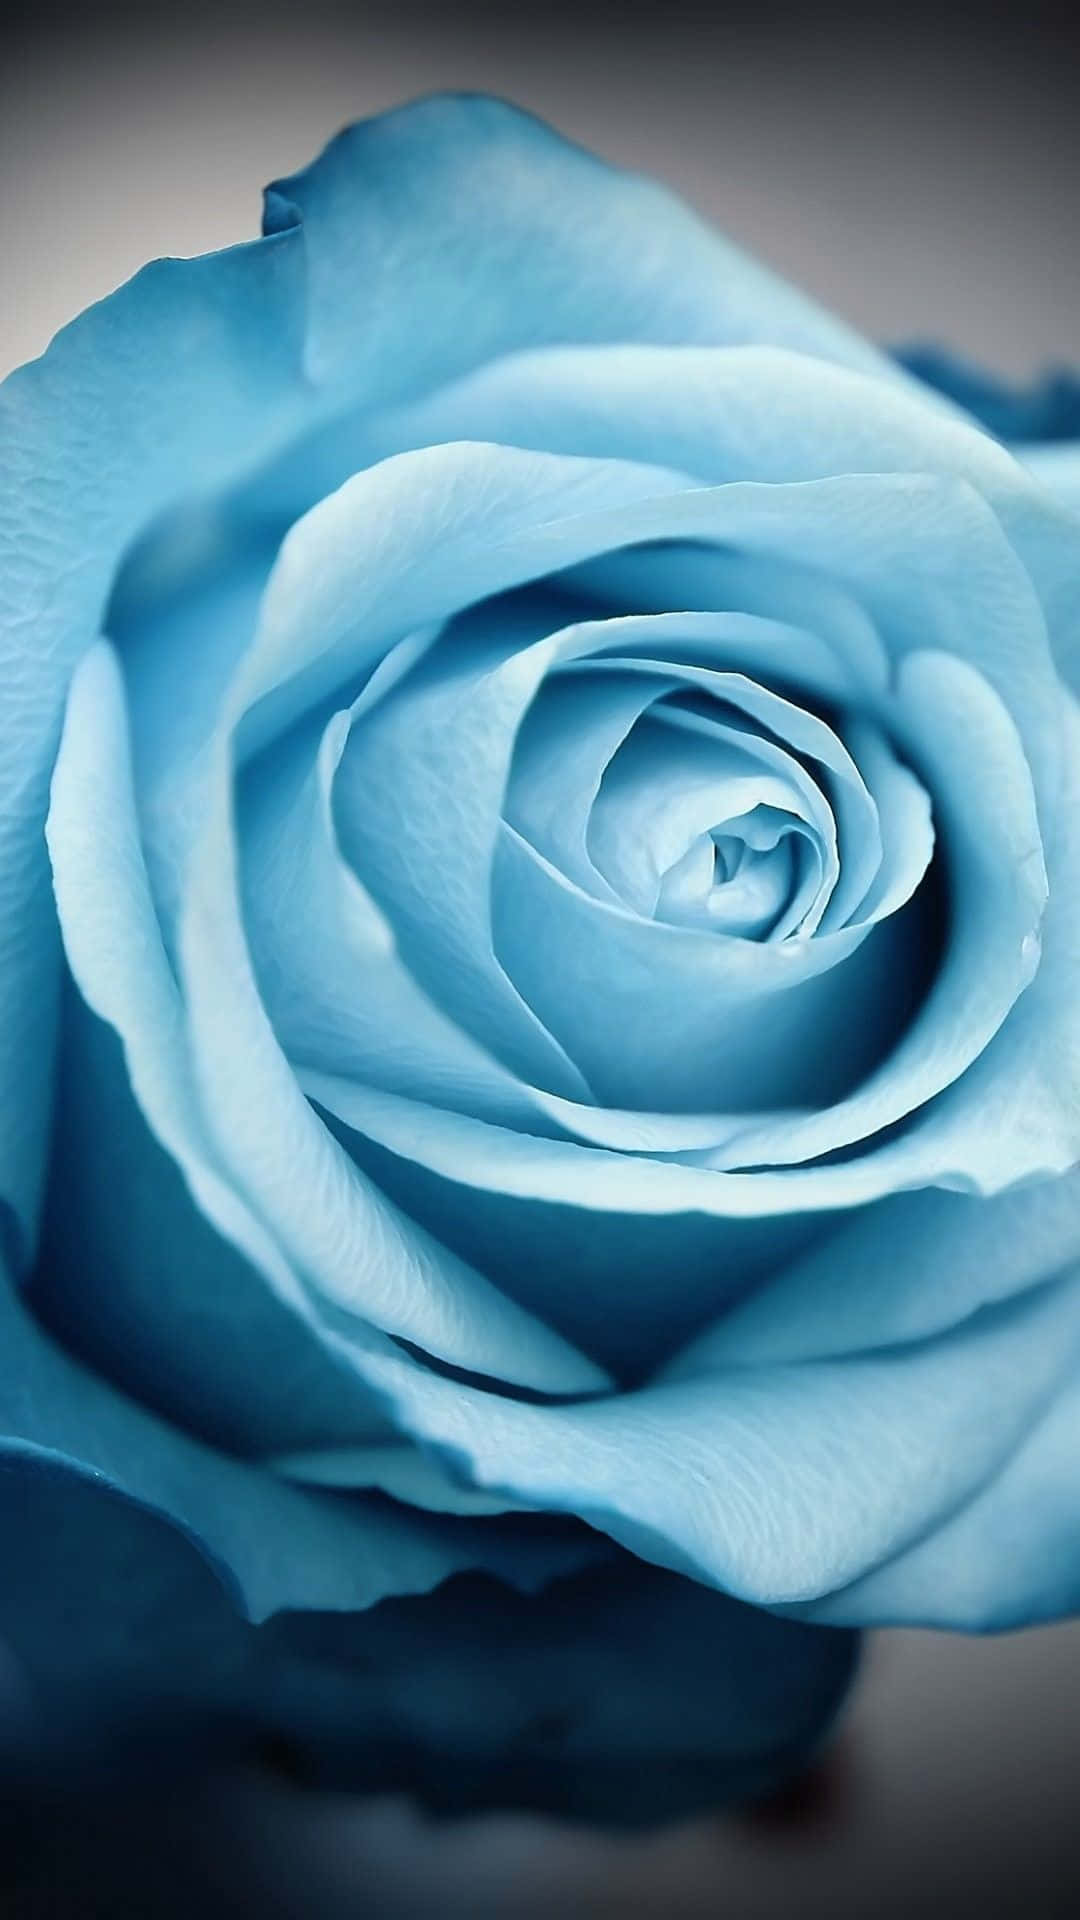 Flower Iphone Blue Rose Close Up Pictures